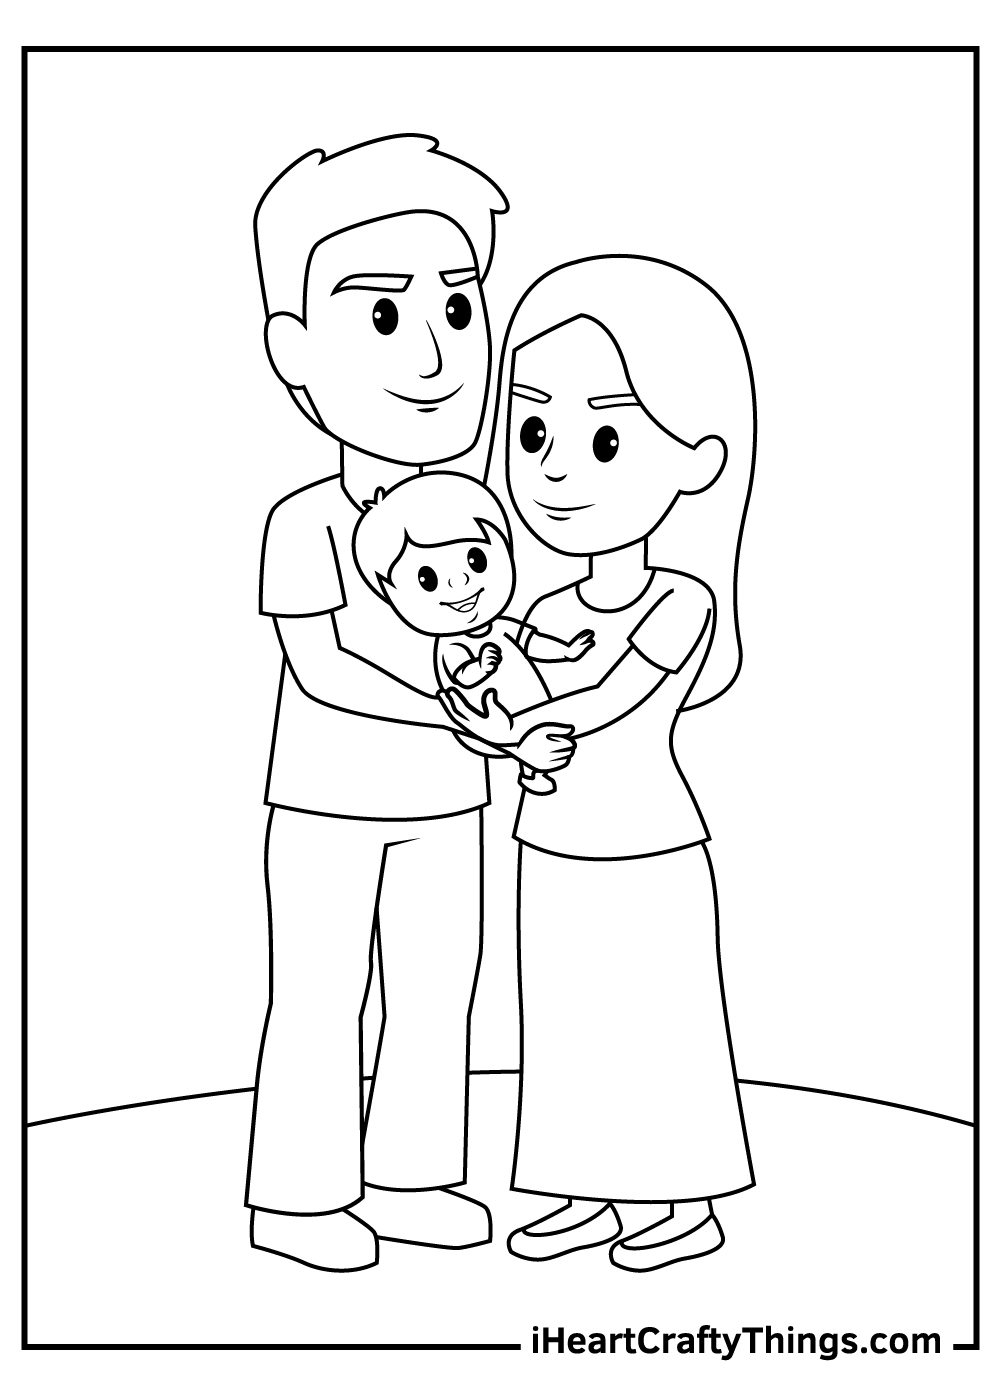 Printable Family Coloring Pages (Updated 2023)